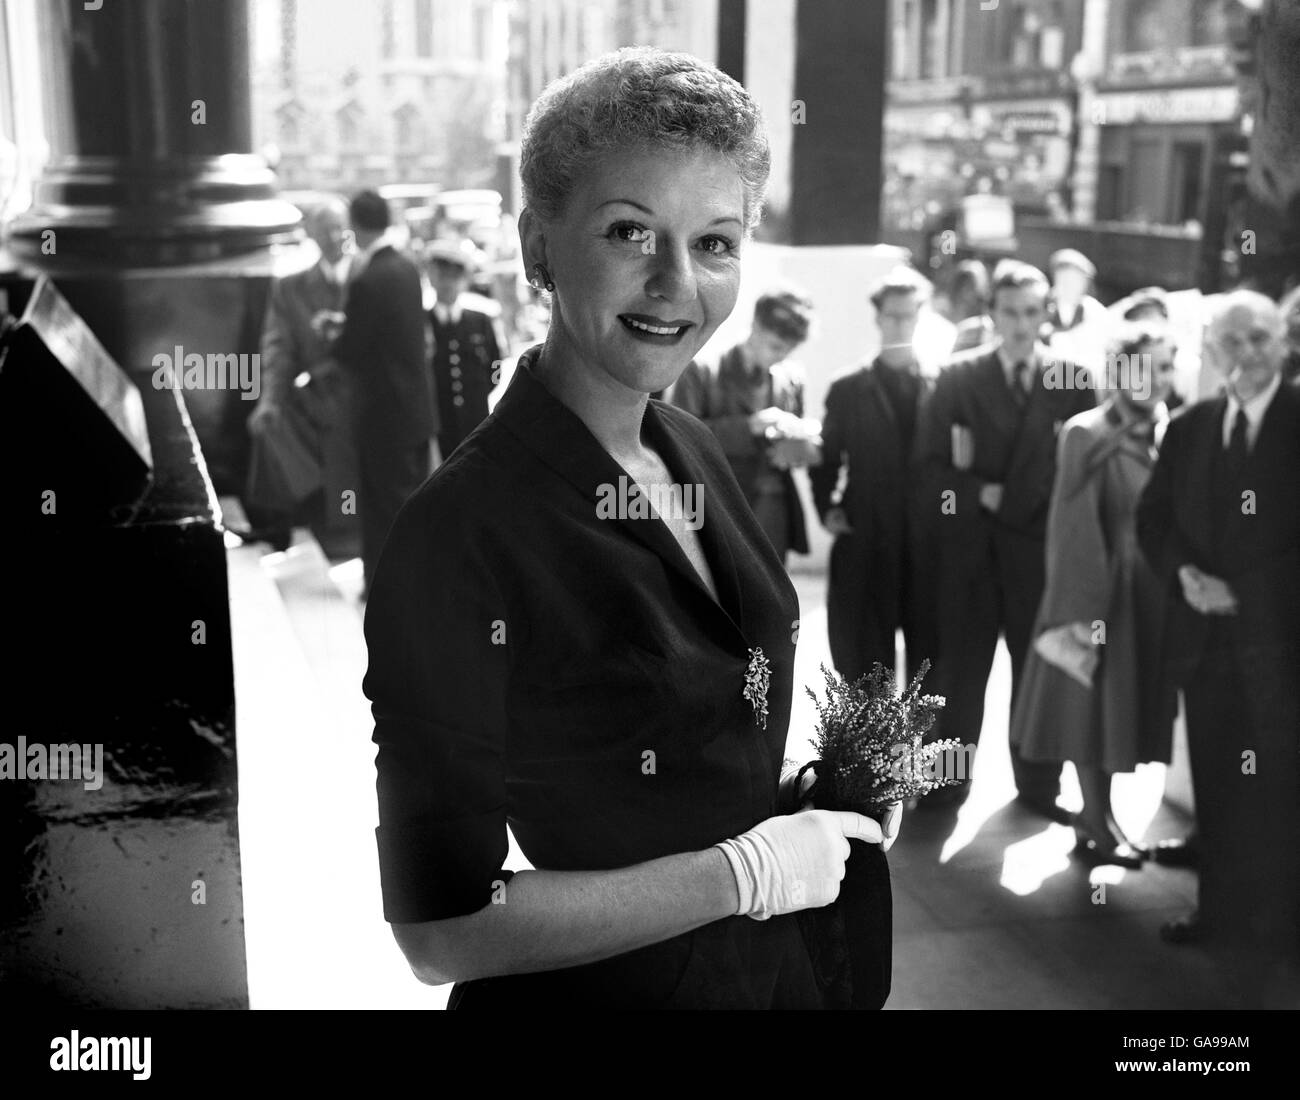 American singer of stage and screen fame, Mary Martin, arrives at the Theatre Royal, Drury Lane, London today to begin rehearsal for her role in the London production of 'South Pacific'. Stock Photo